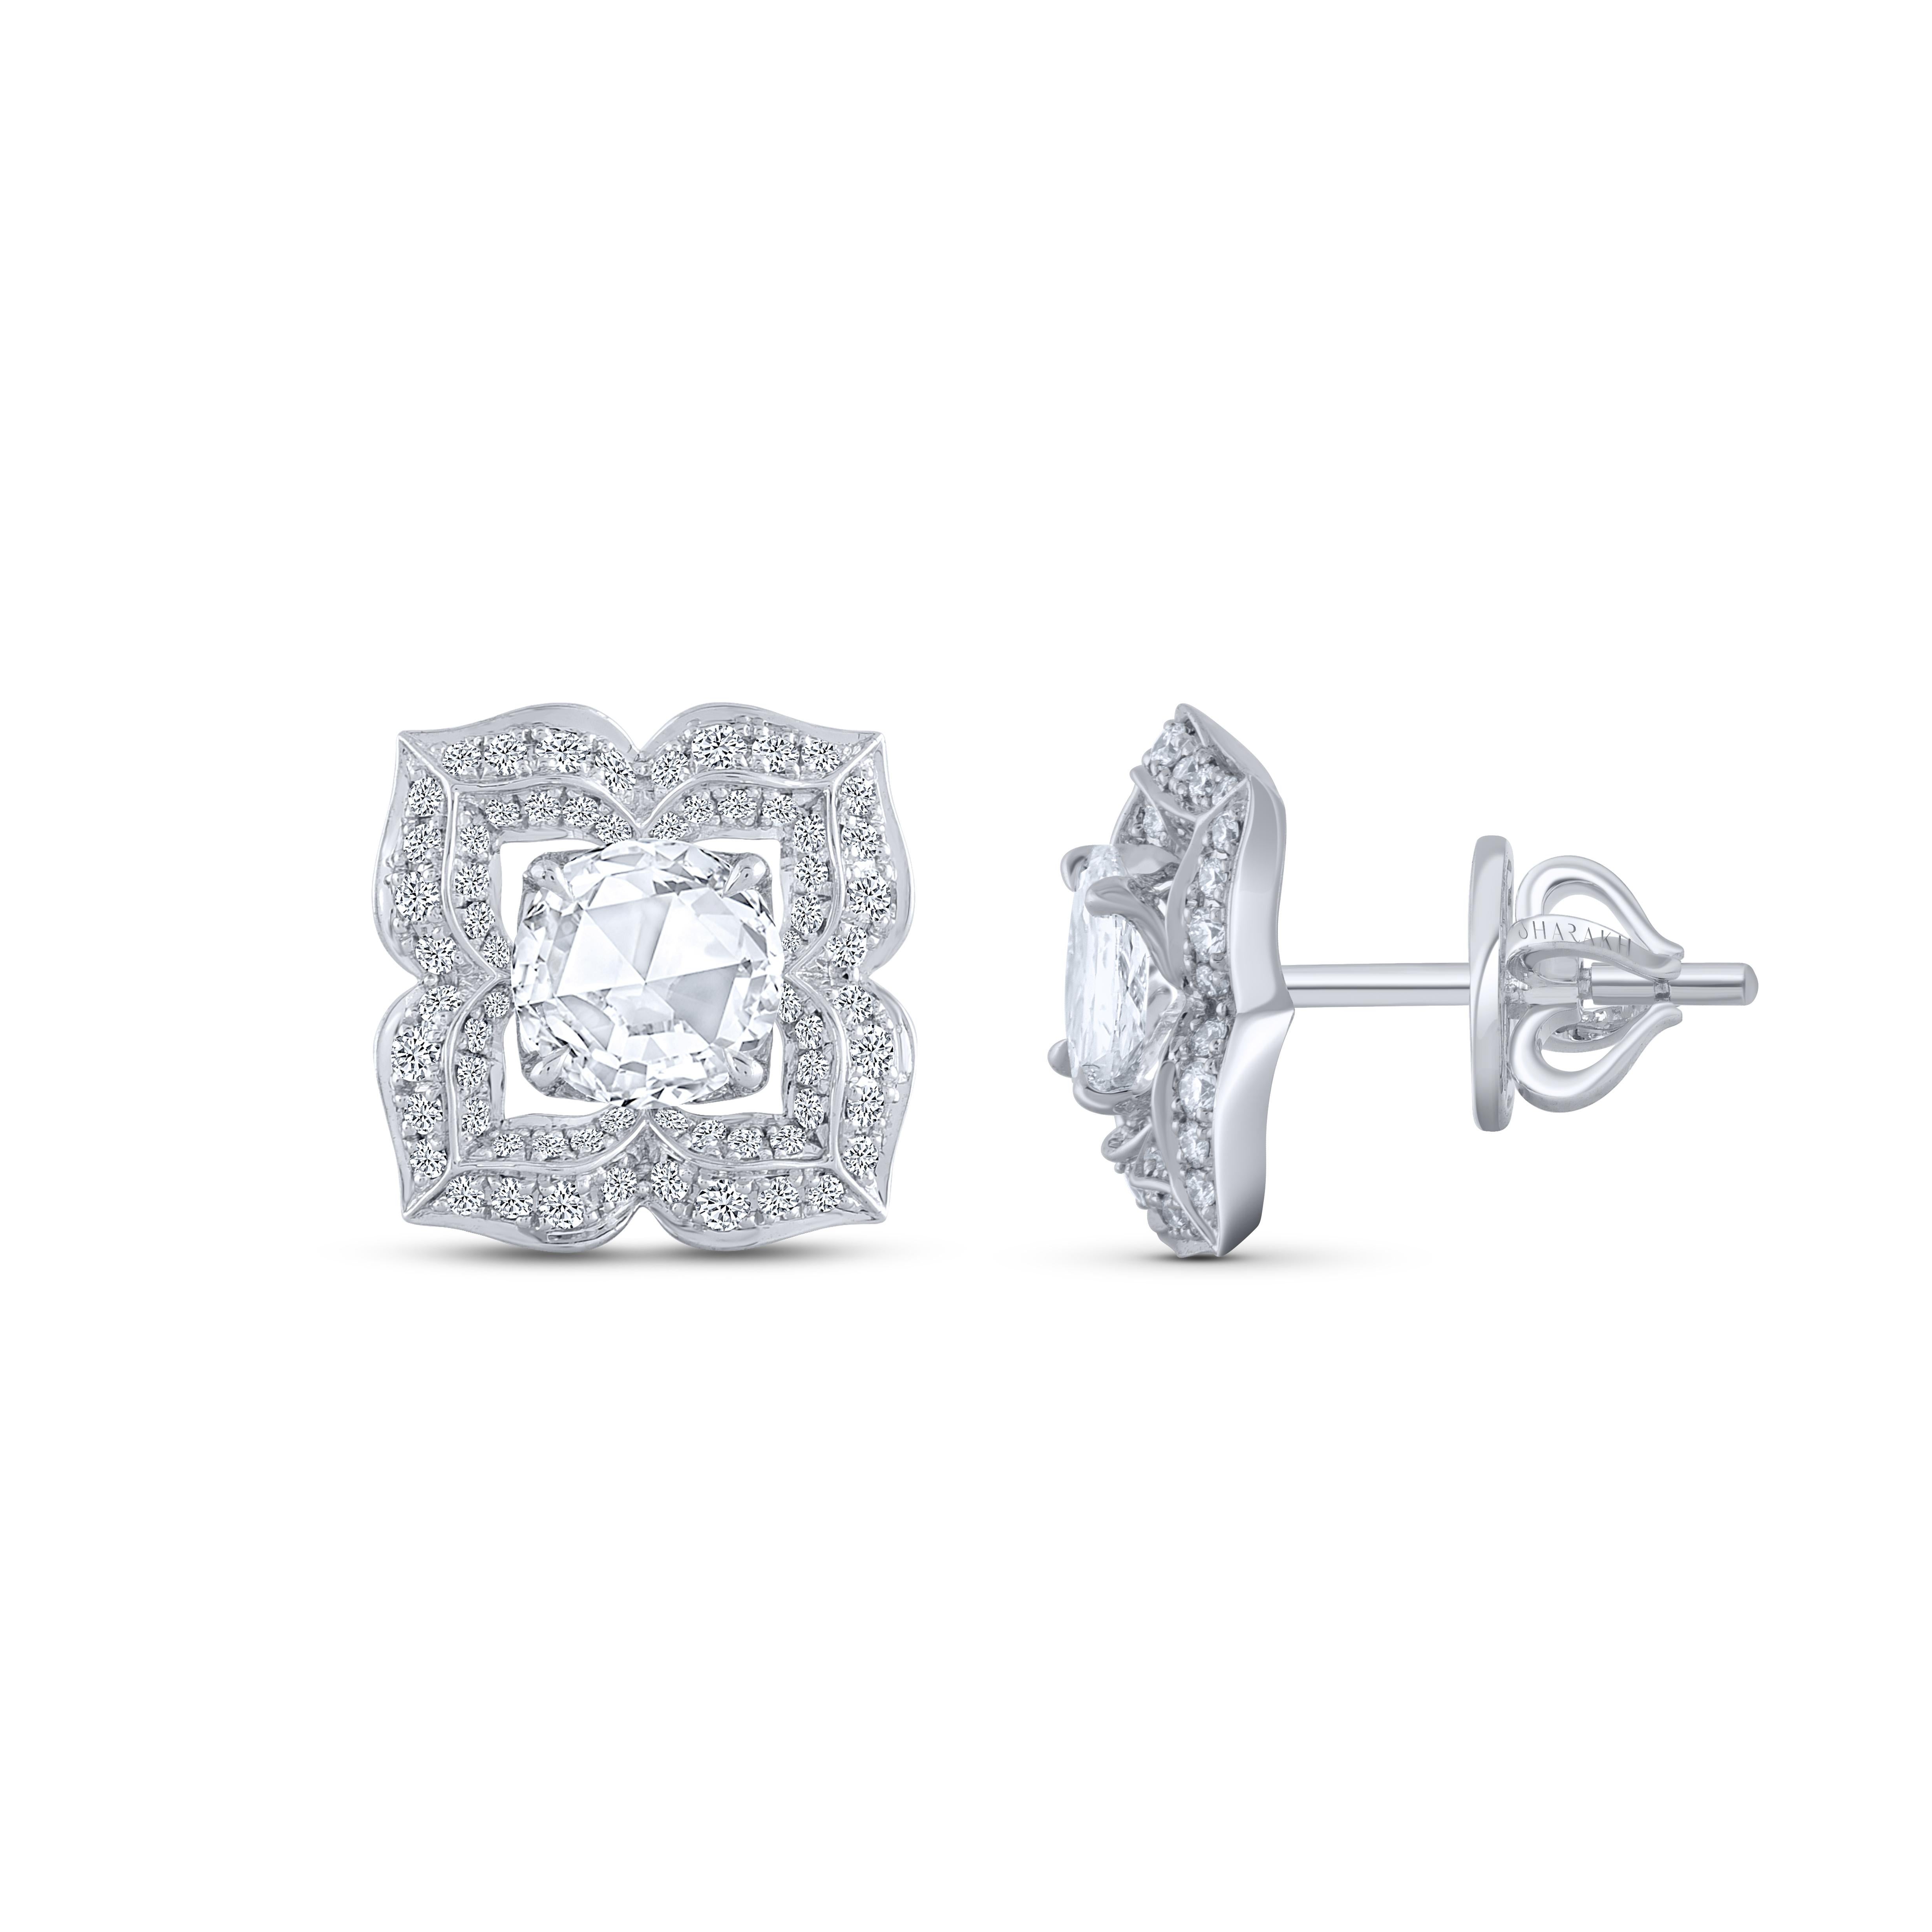 These beautiful earrings are studded with 112 brilliant cut and 2 rose cut diamonds. The total diamond weight of these diamond earrings is 0.94 carats. All the diamonds are D-F color, IF-VS clarity. This white gold stud earrings will come along with